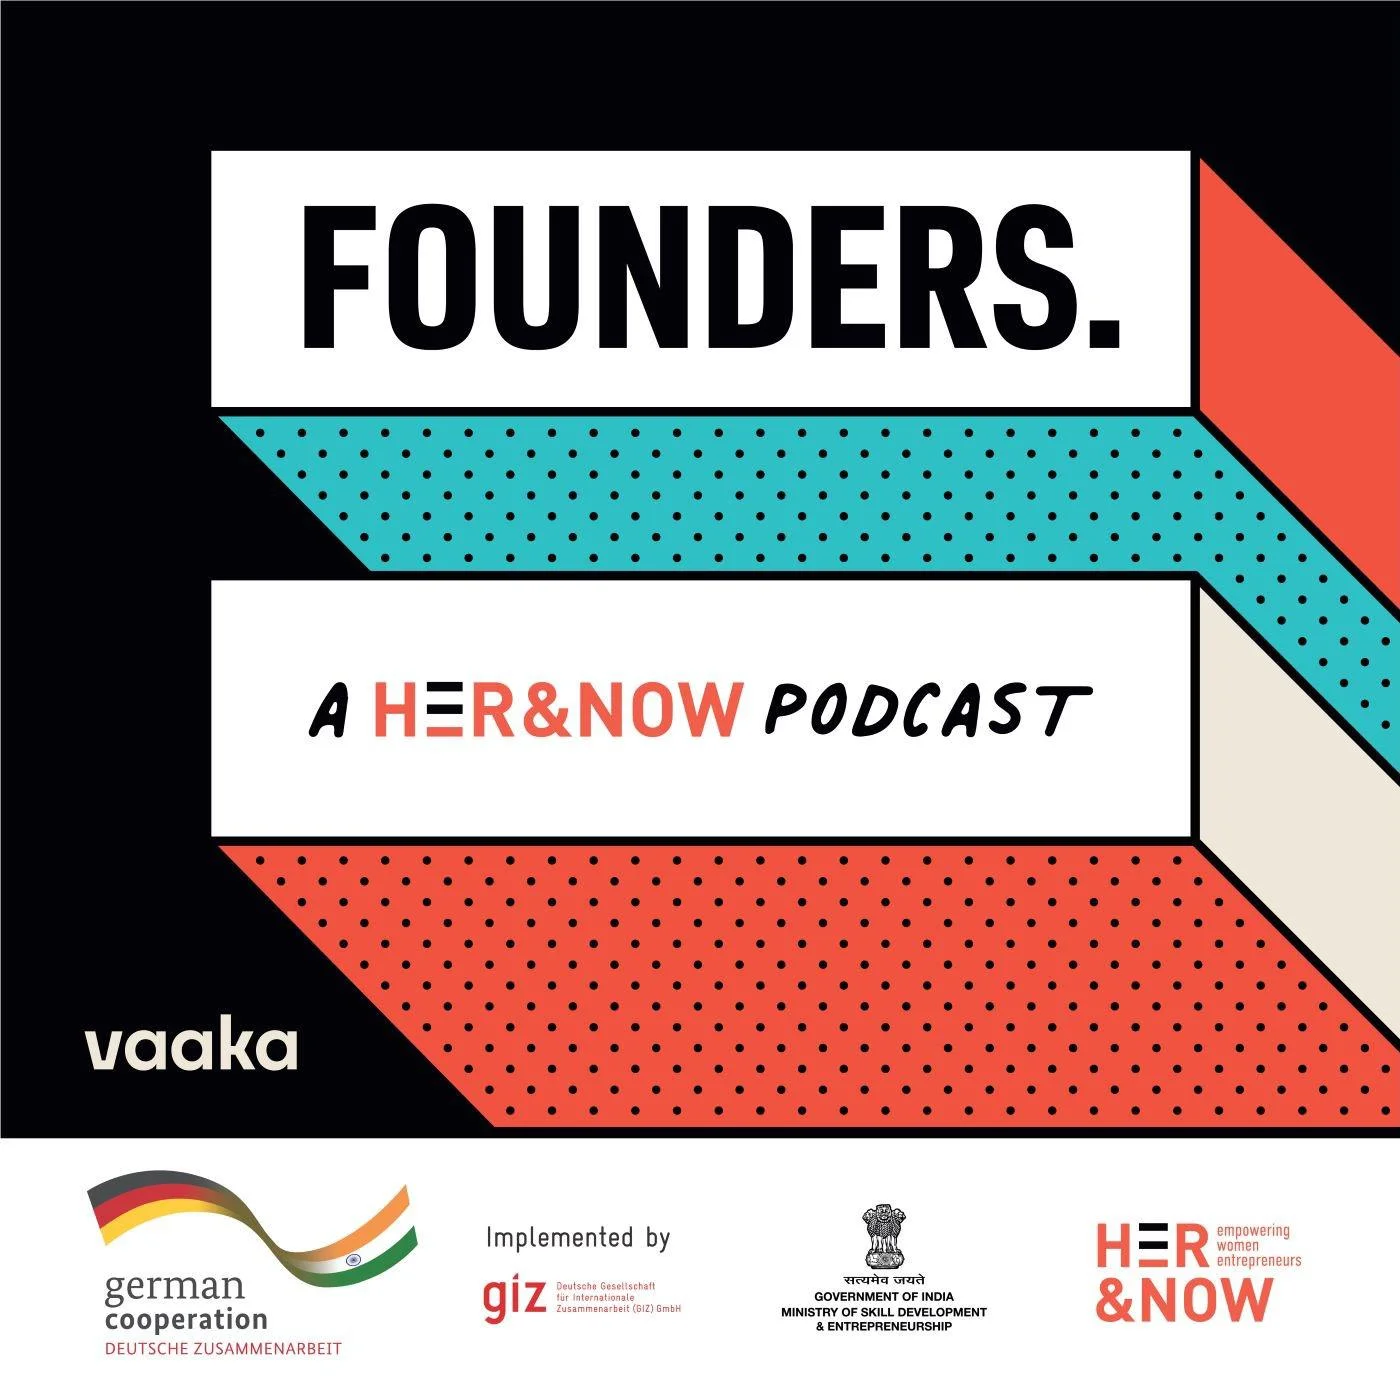 founders-a-hernow artwork- social impact podcast